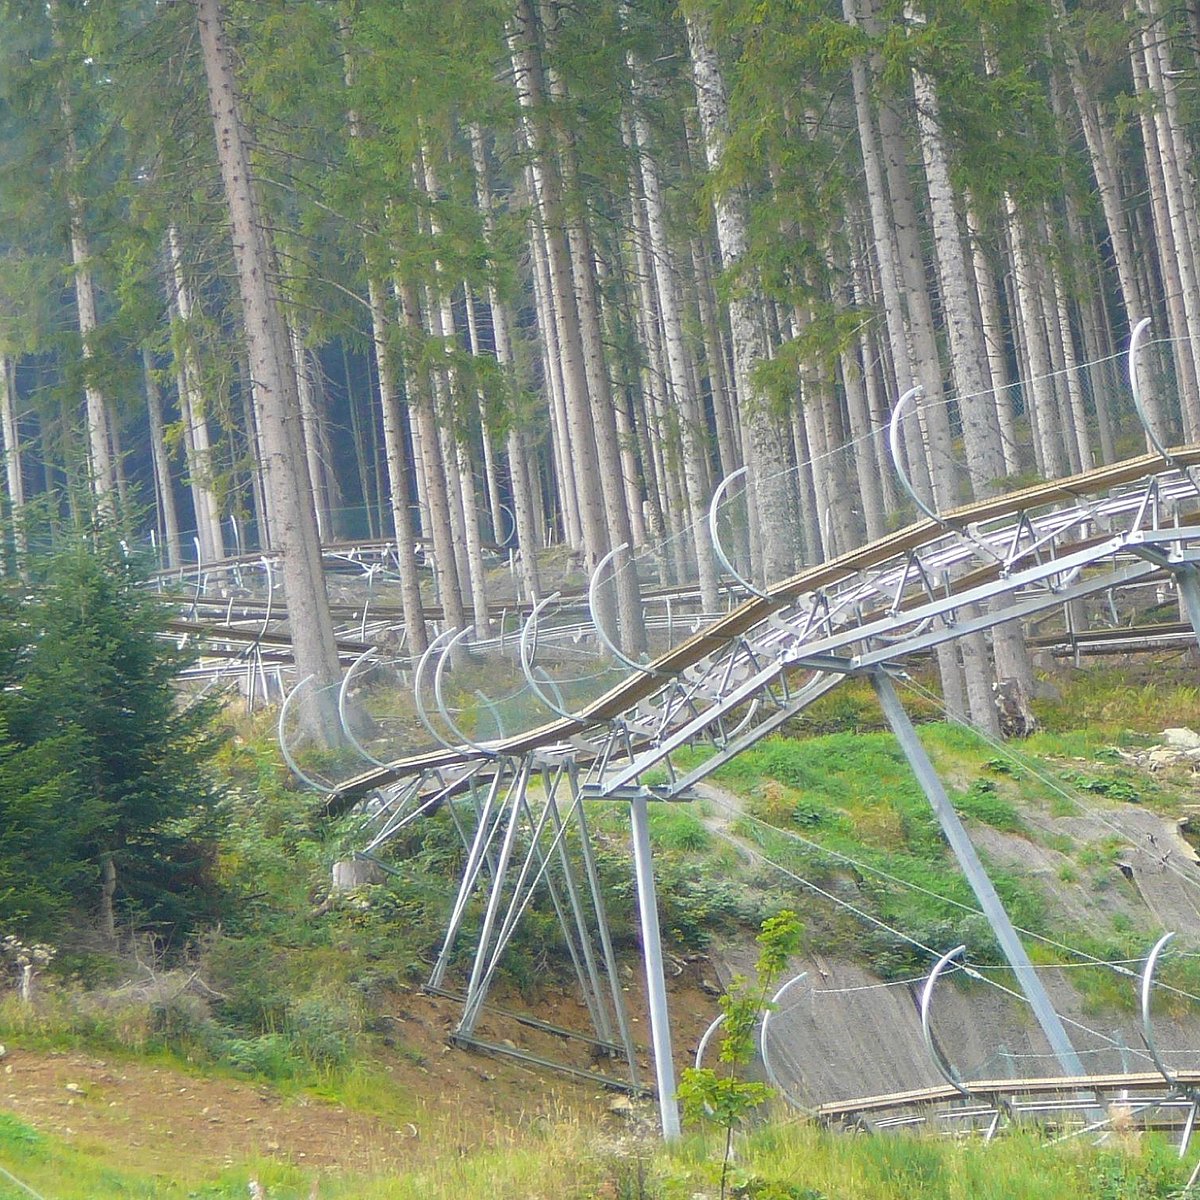 Sommerrodelbahn Rittisberg Coaster - All You Need to Know